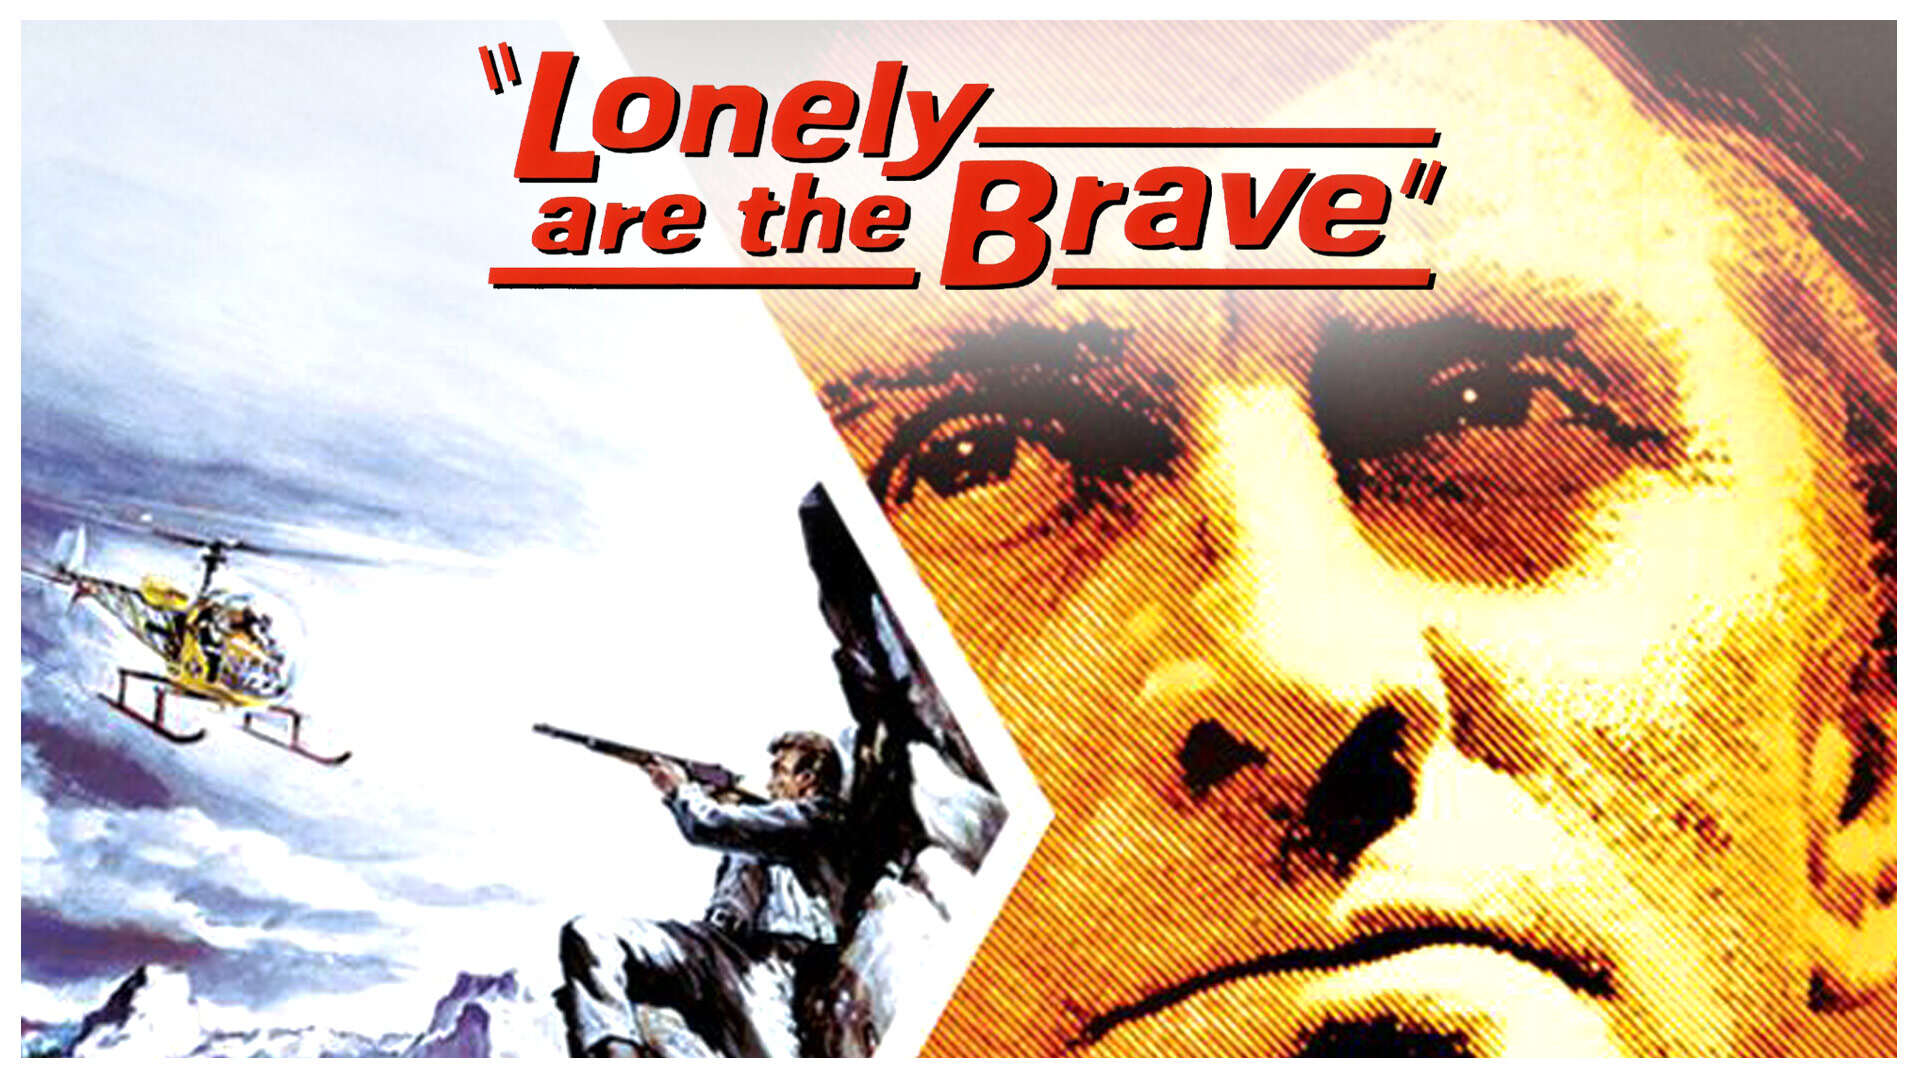 41-facts-about-the-movie-lonely-are-the-brave